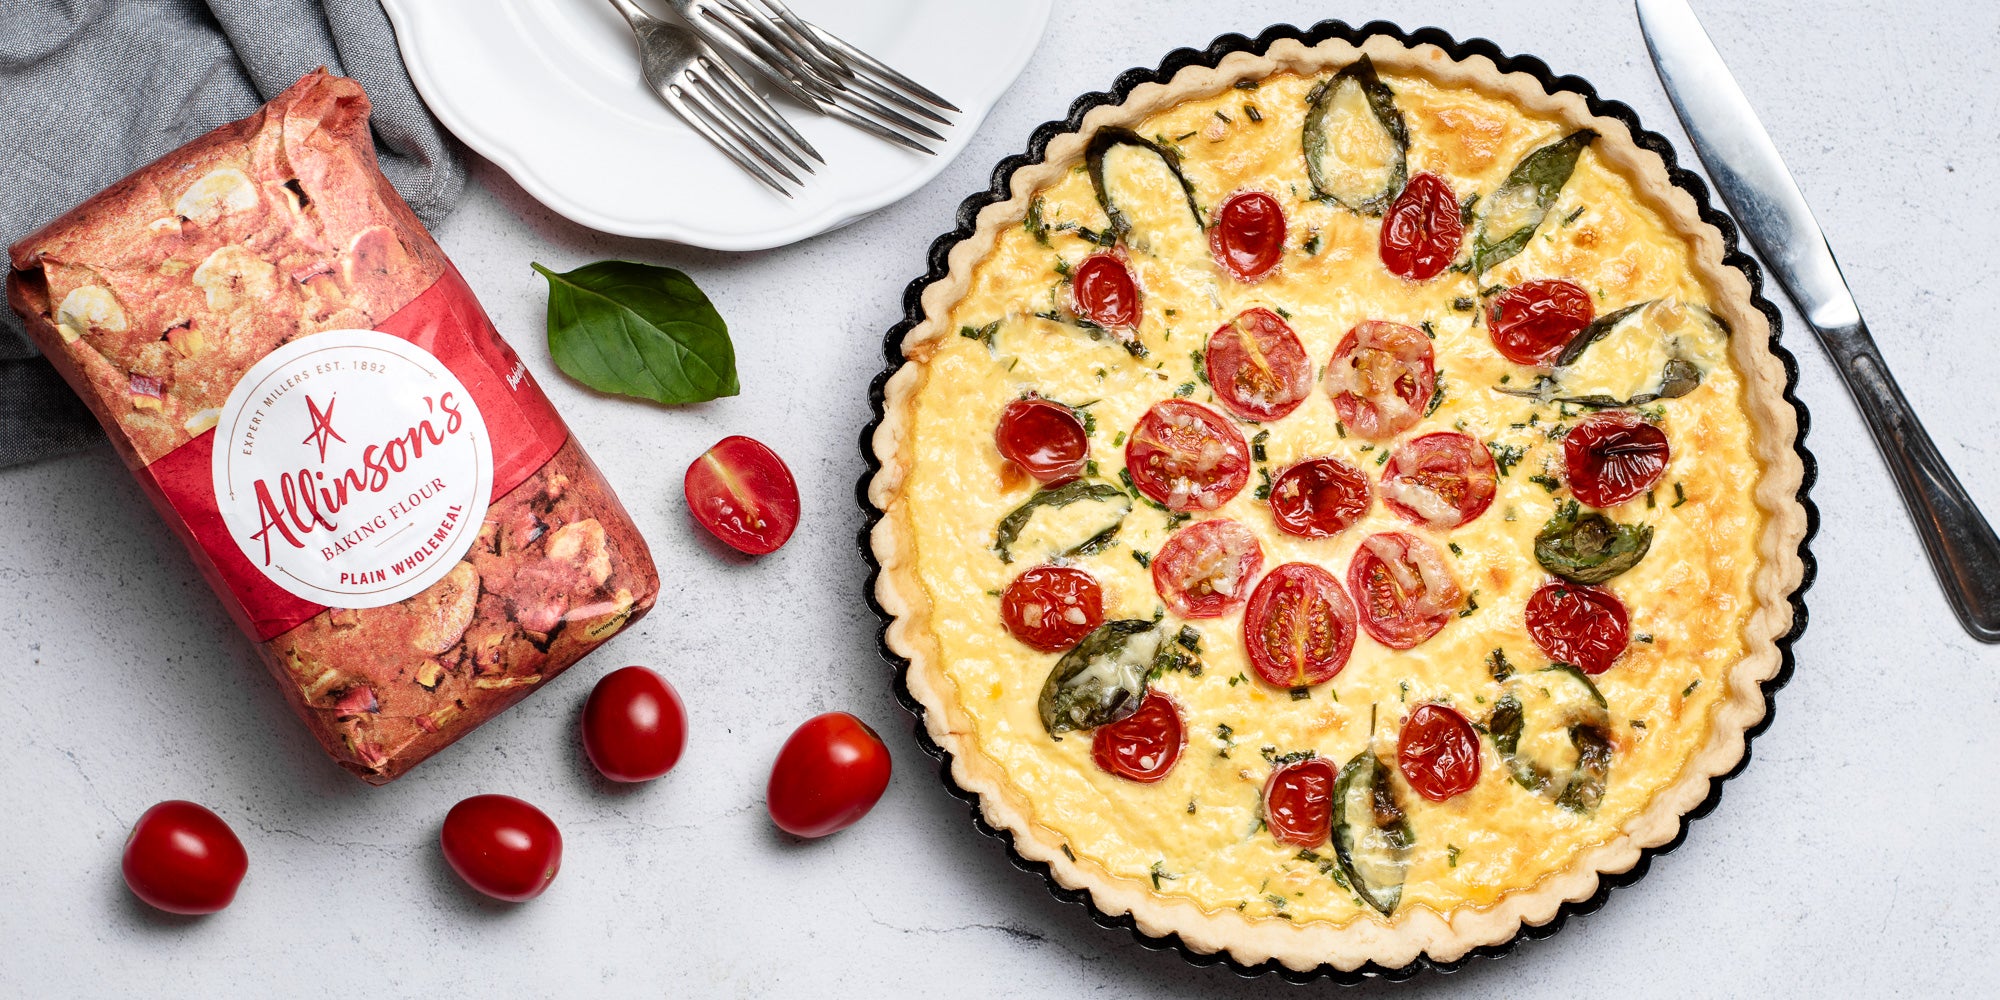 Cheese & Tomato Quiche with a bag of Allinson's Plain Wholemeal flour and chopped tomatoes